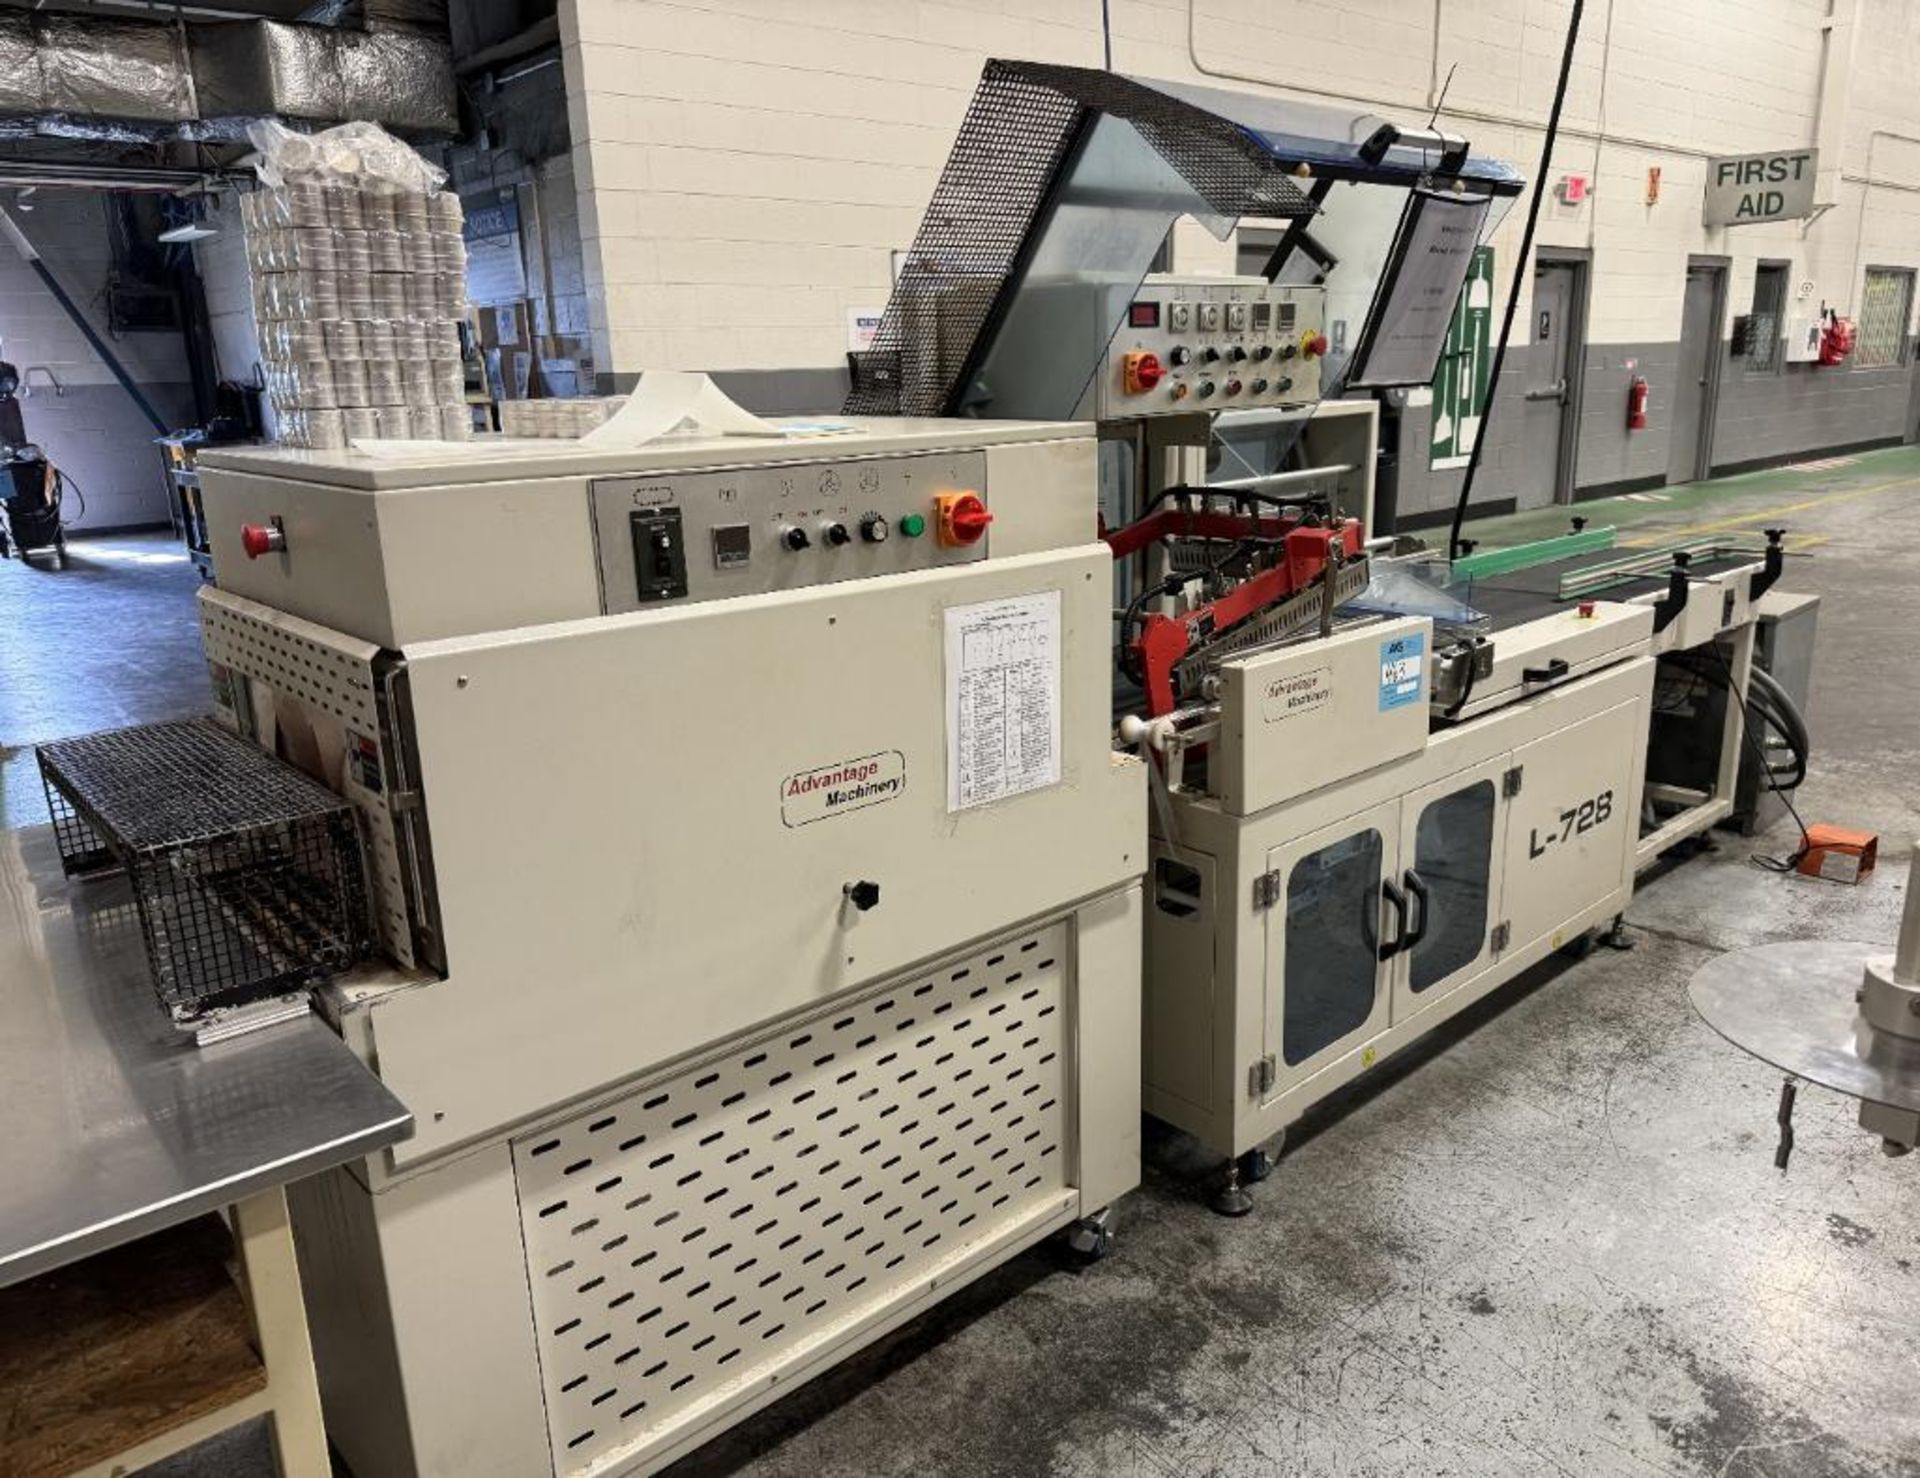 Advantage Machinery L-728 L-Bar Sealing Machine, Serial# 19-001156B, Built 2019. With belted conveyo - Image 2 of 18